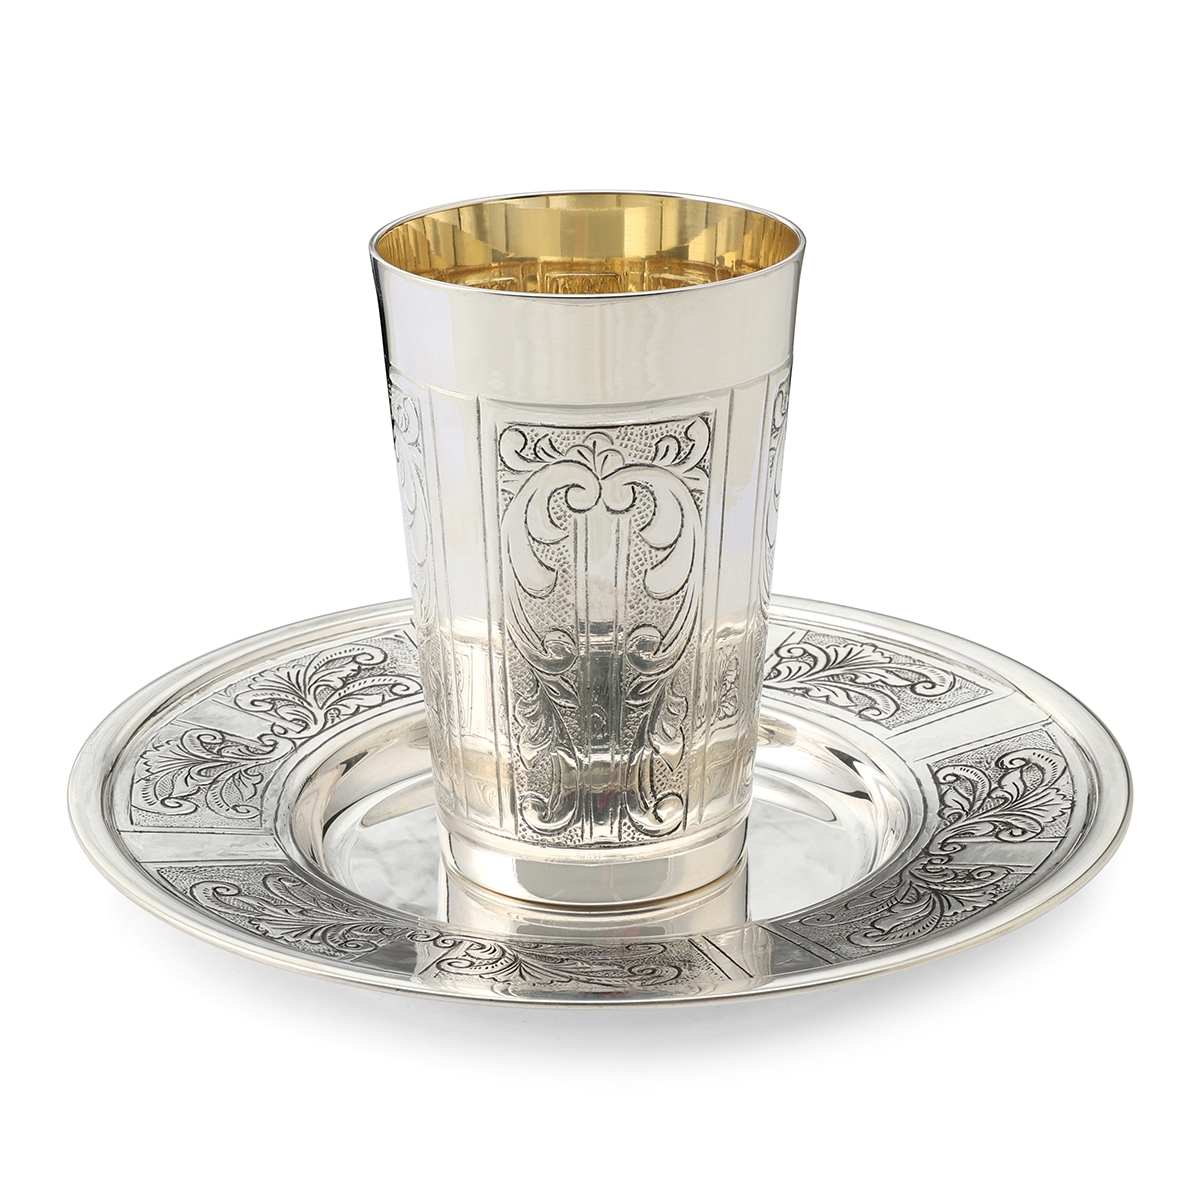 Sterling Silver Plated Kiddush Cup Set with Damask Panels - 1